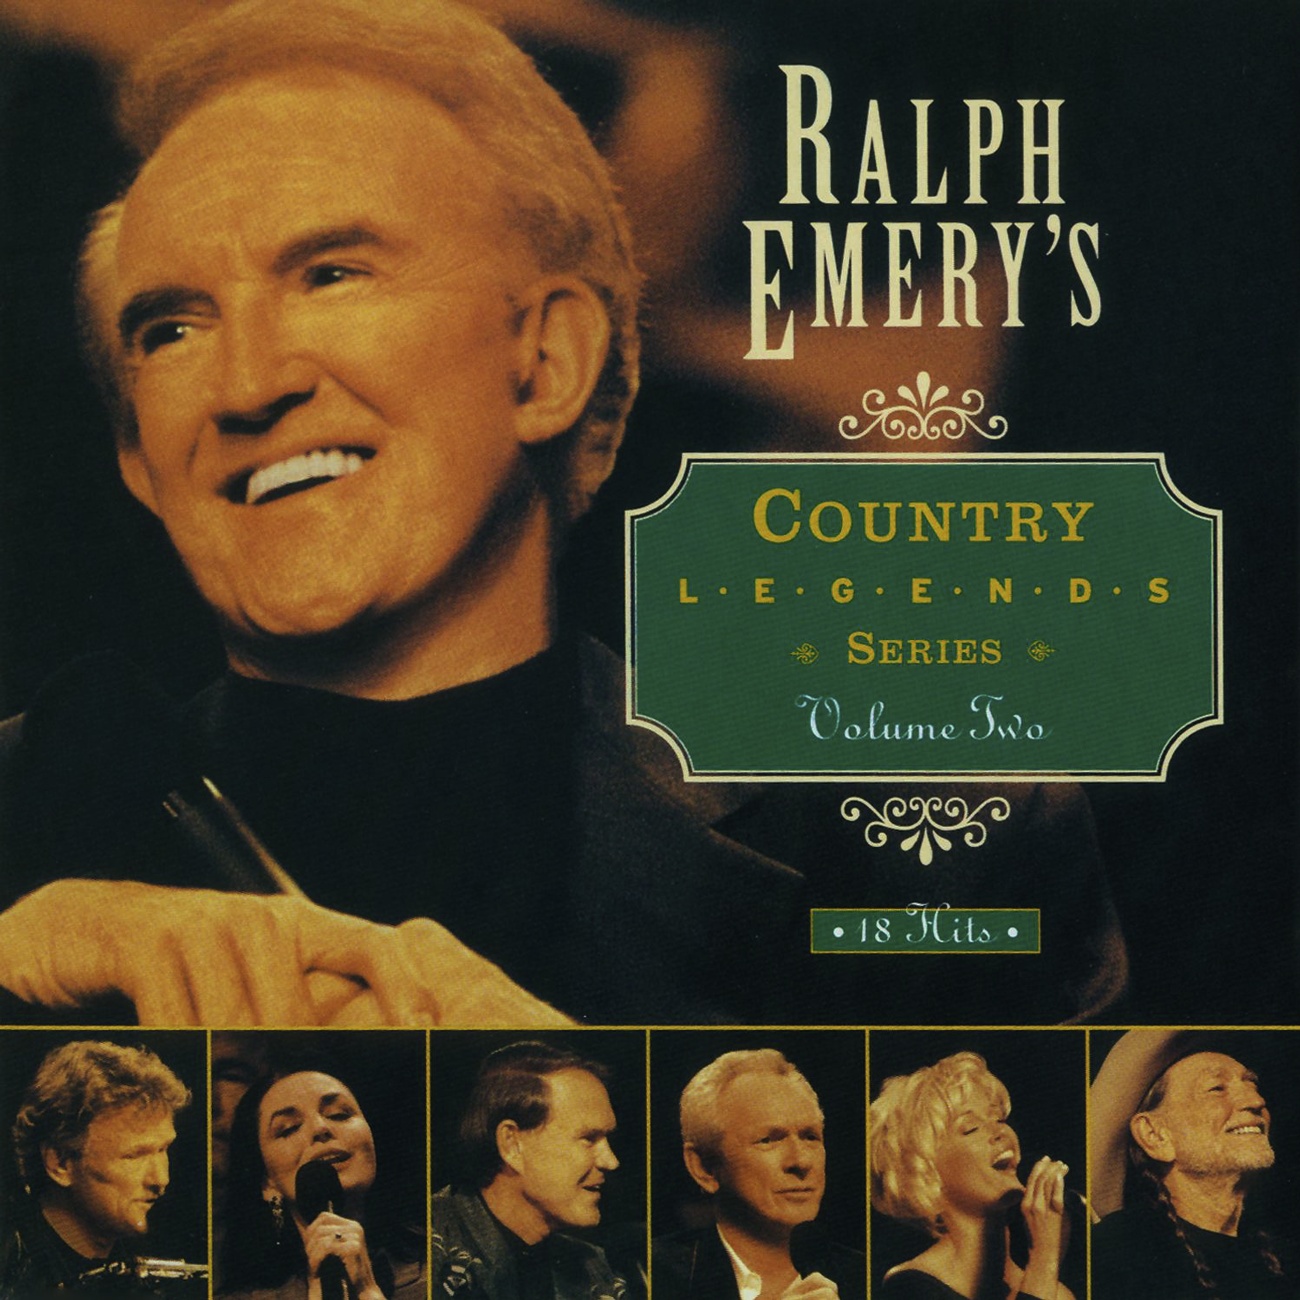 Georgia On A Fast Train (Ralph Emery's Country Legends Homecoming Vol 2 album version)